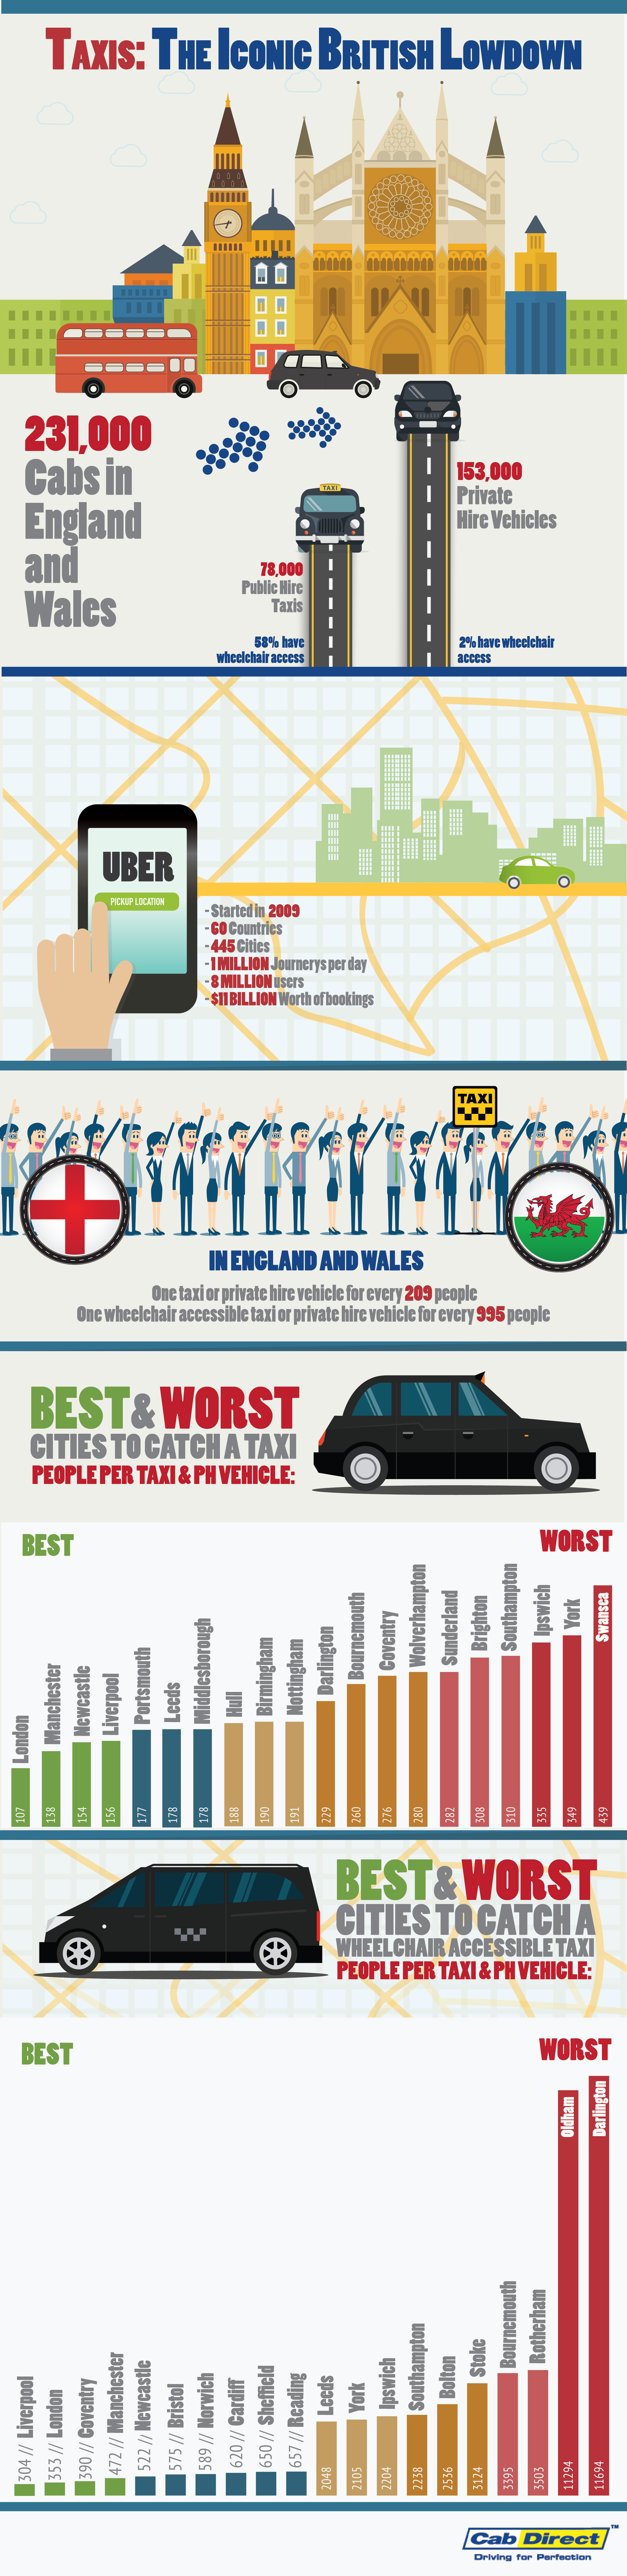 Cab Direct Infographic at UK Taxi Services: What are the Best and Worst Locations?